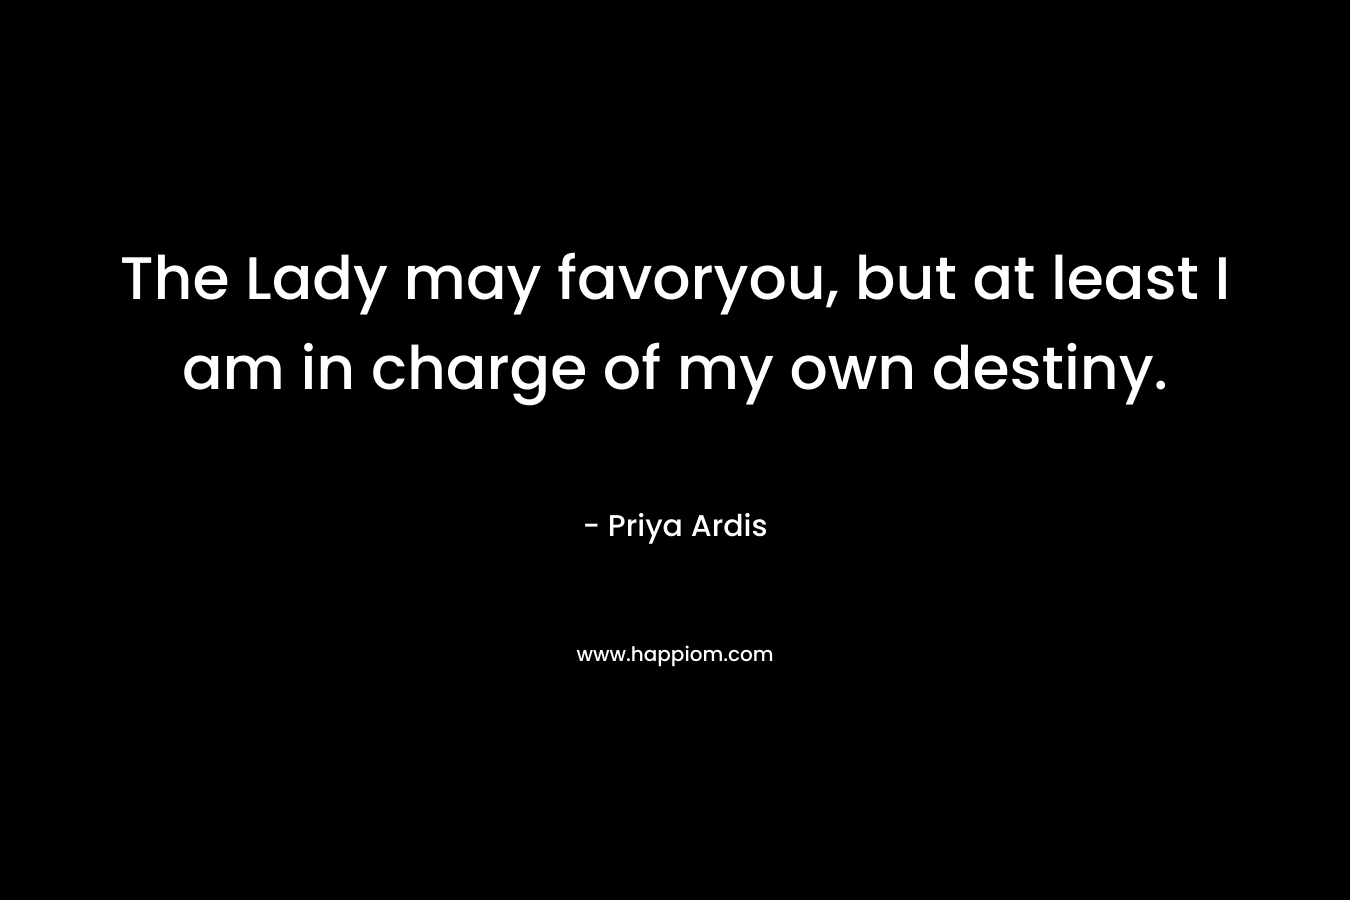 The Lady may favoryou, but at least I am in charge of my own destiny.